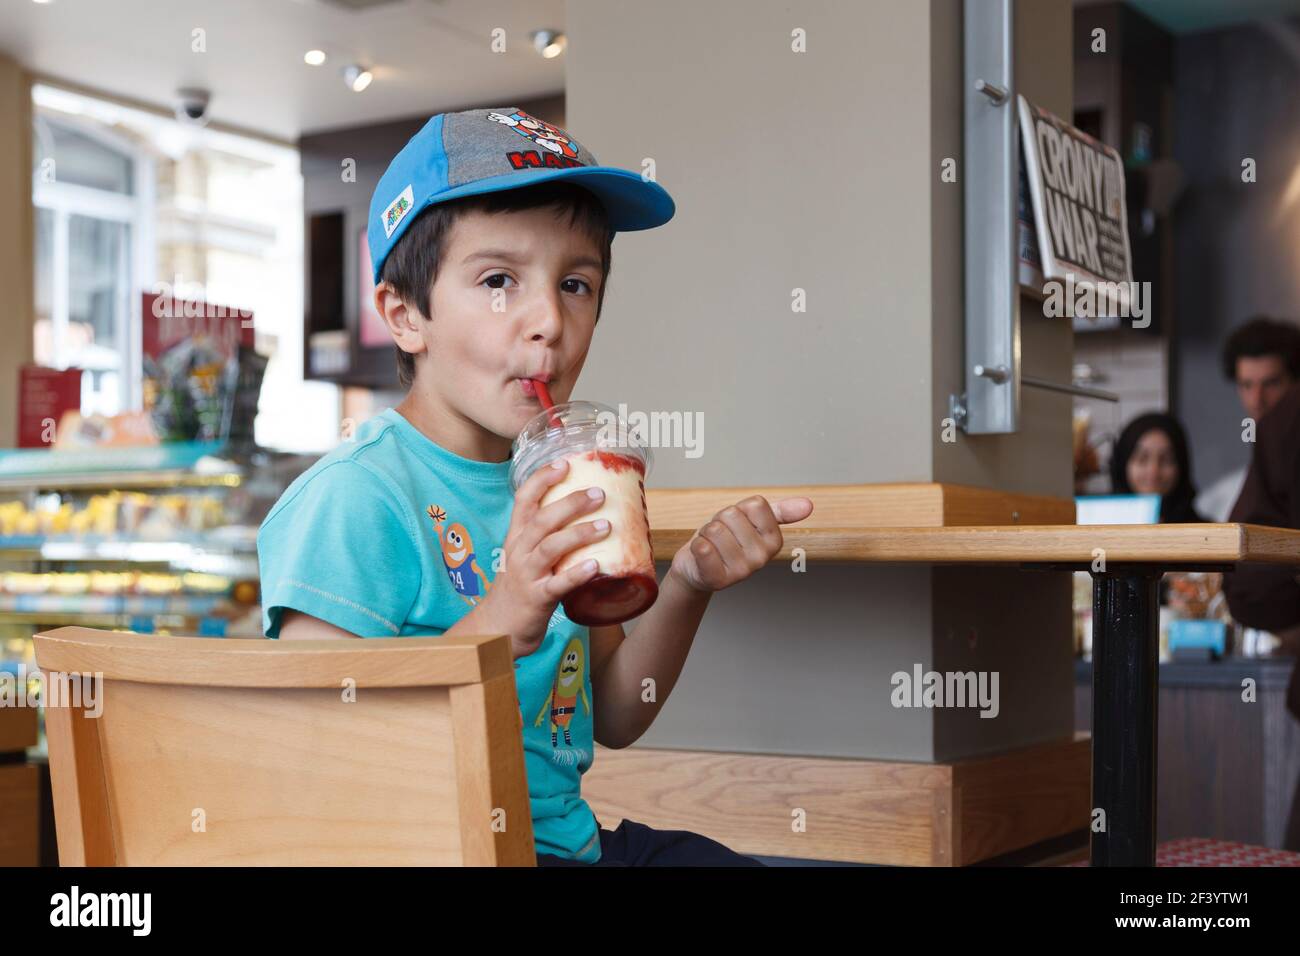 Young boy, age 5-6 years, drinks strawberry milk shake in Coffee shop settings, London,England Stock Photo